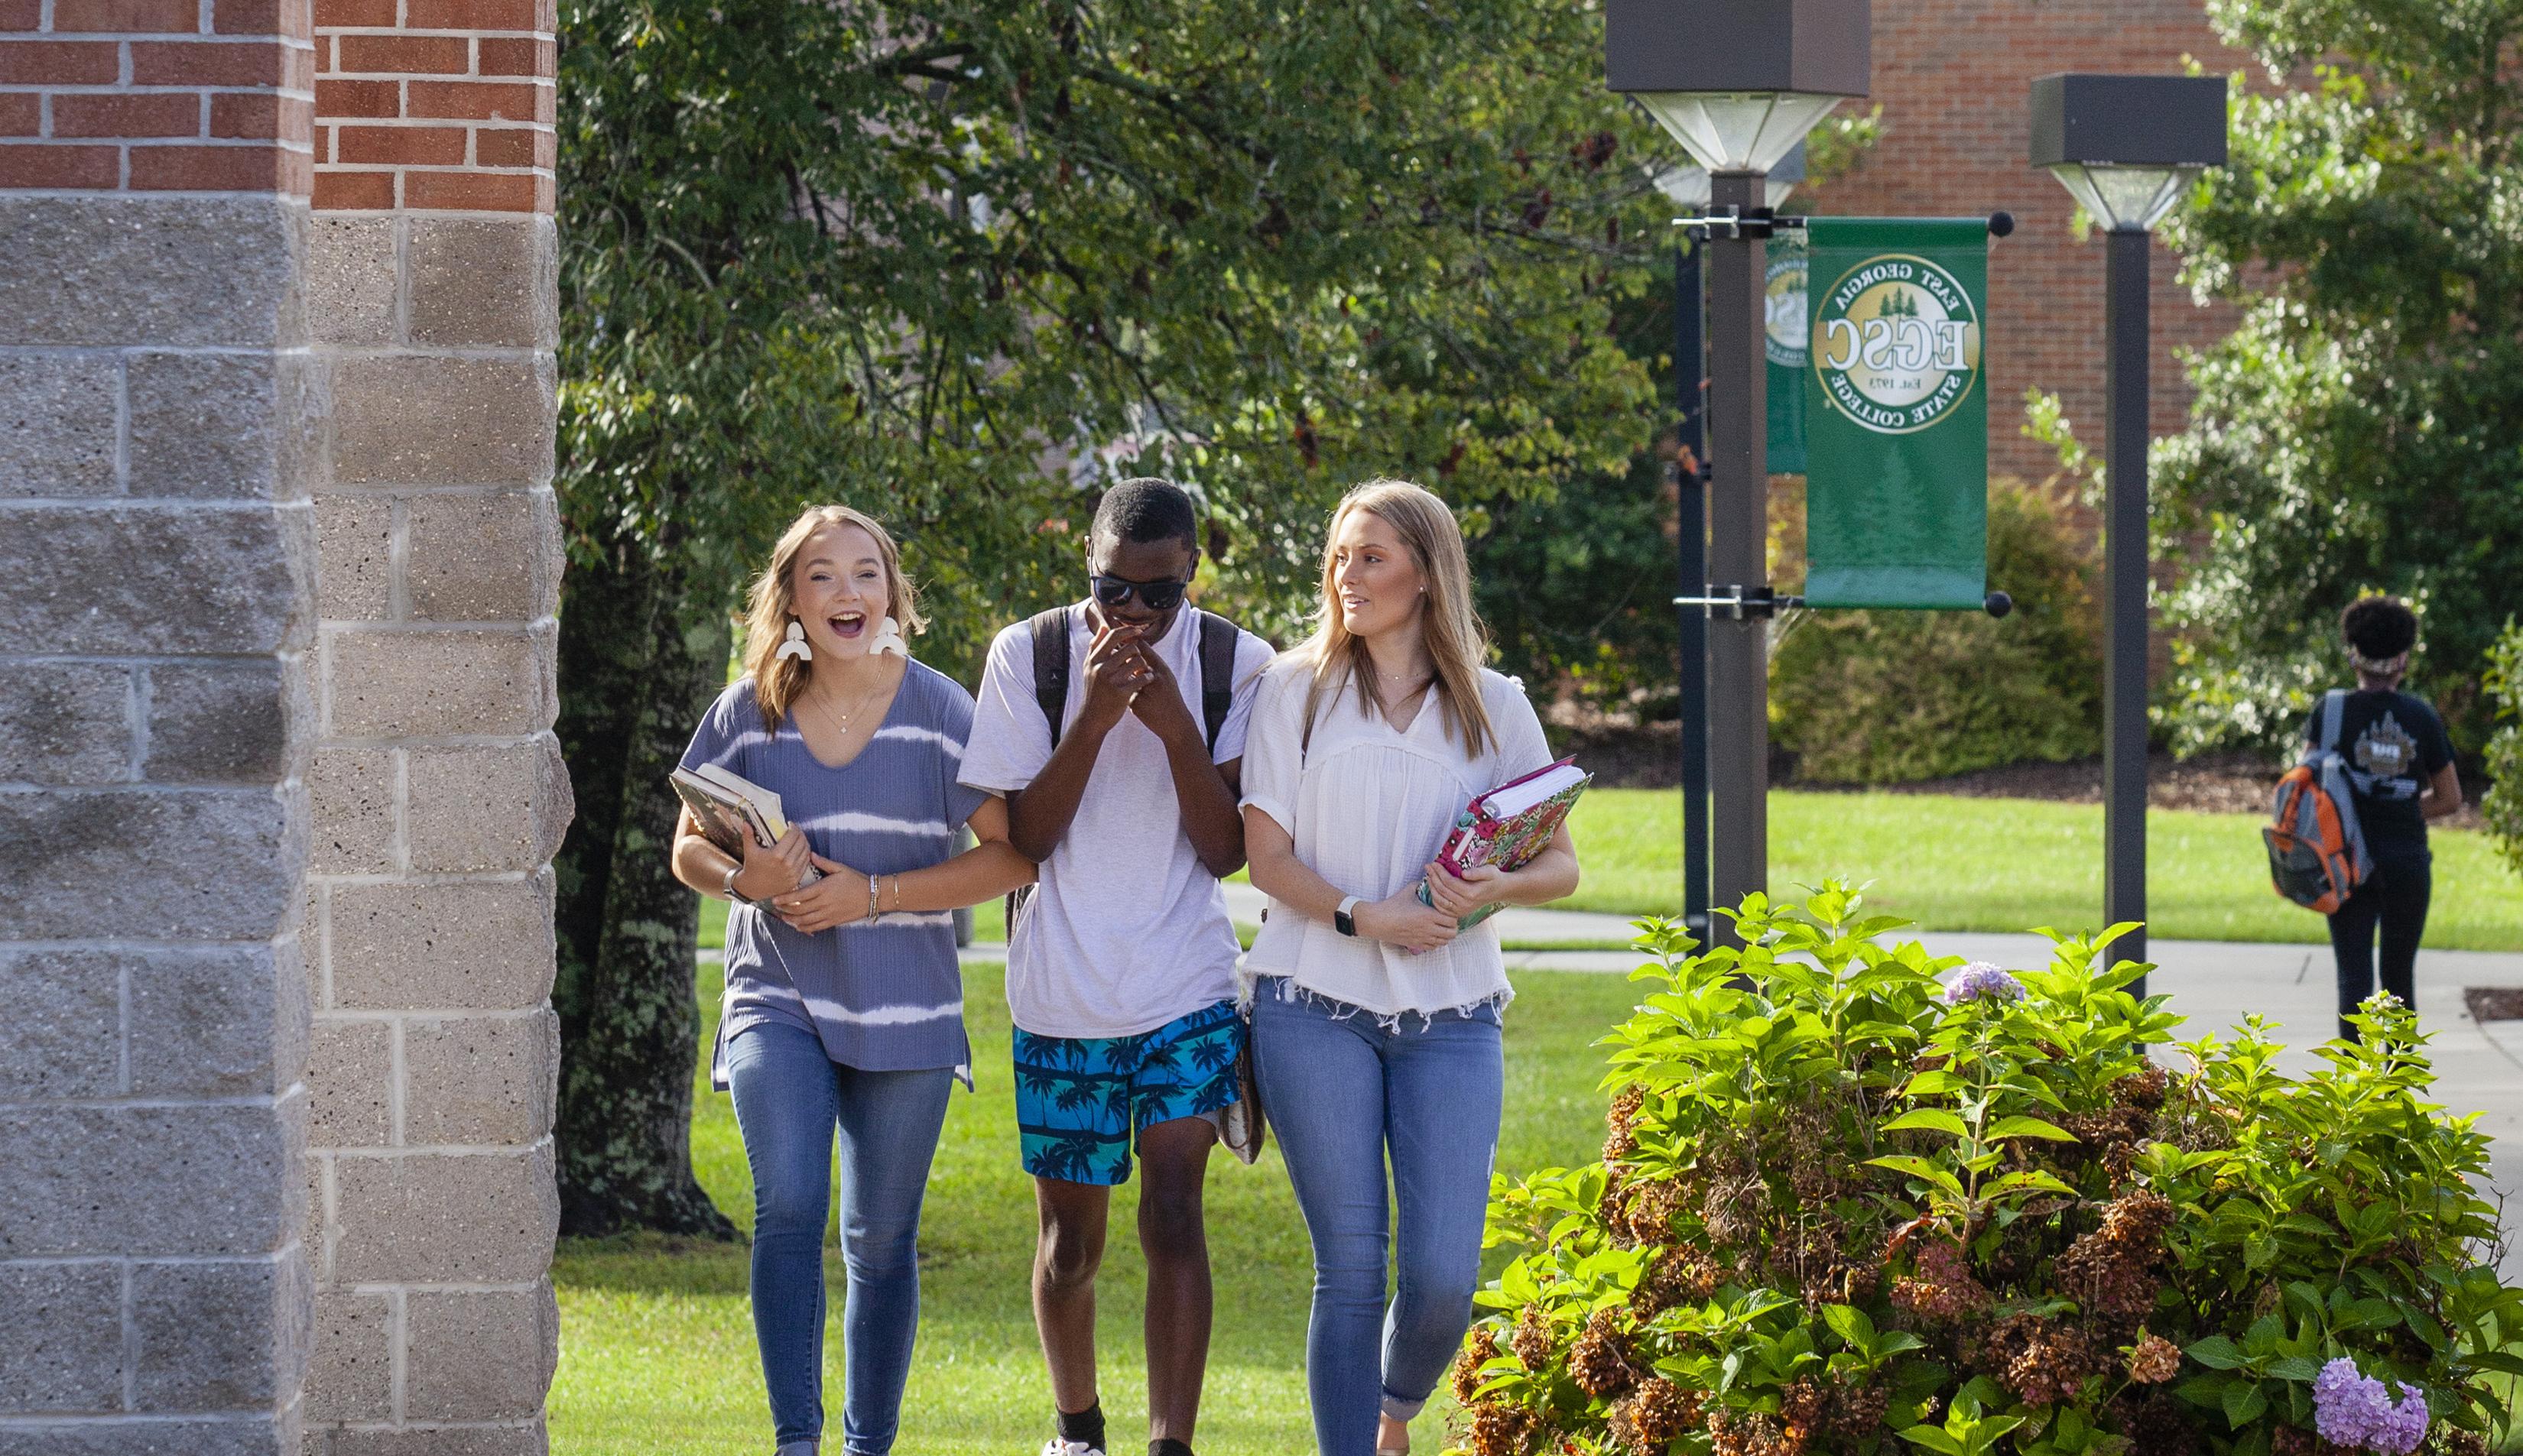 two female students and a male student laughing while walking through campus